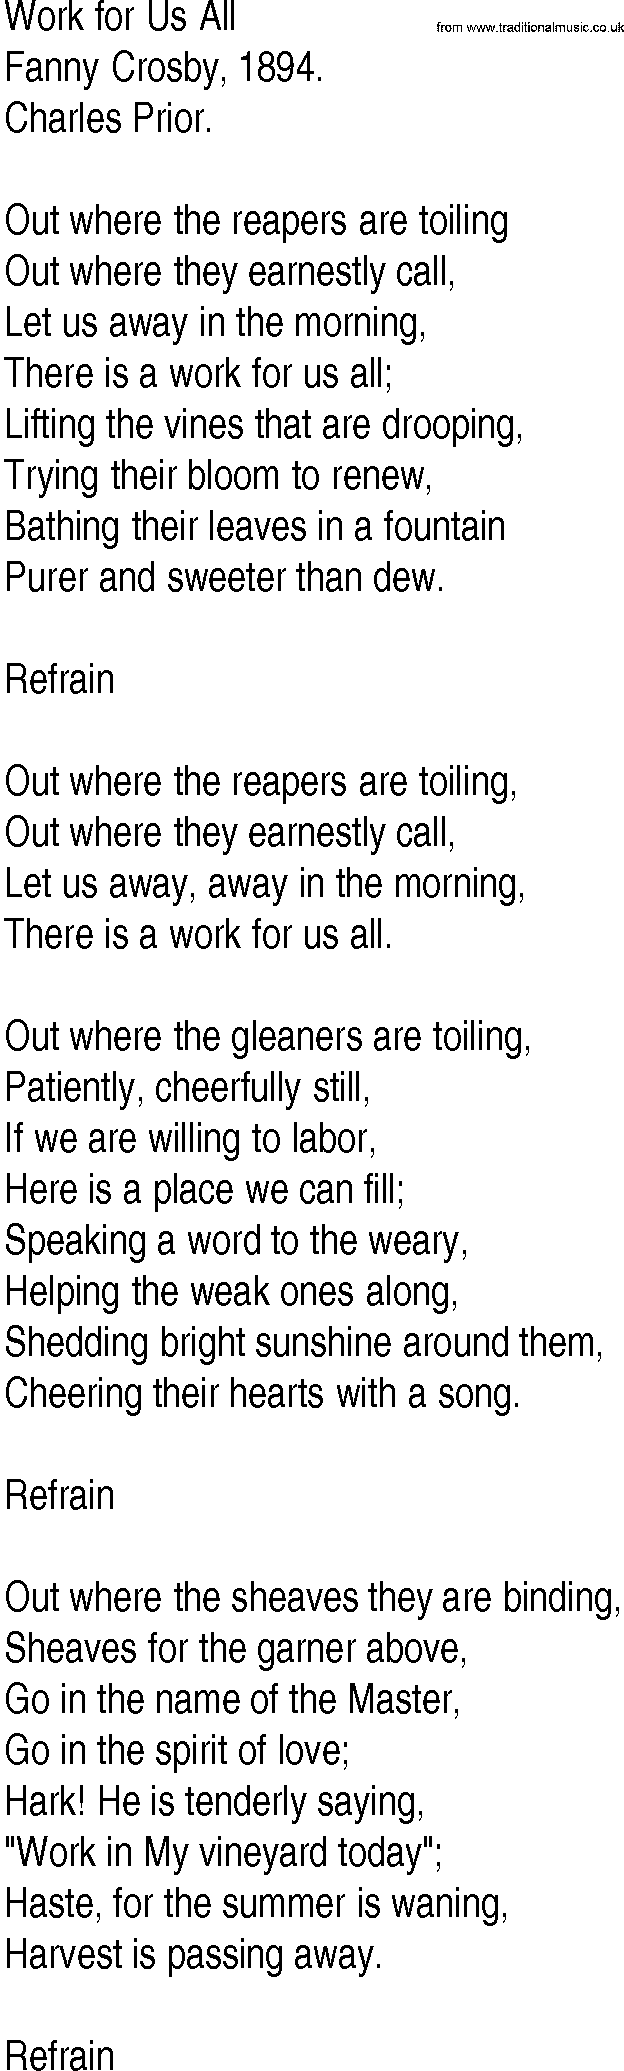 Hymn and Gospel Song: Work for Us All by Fanny Crosby lyrics